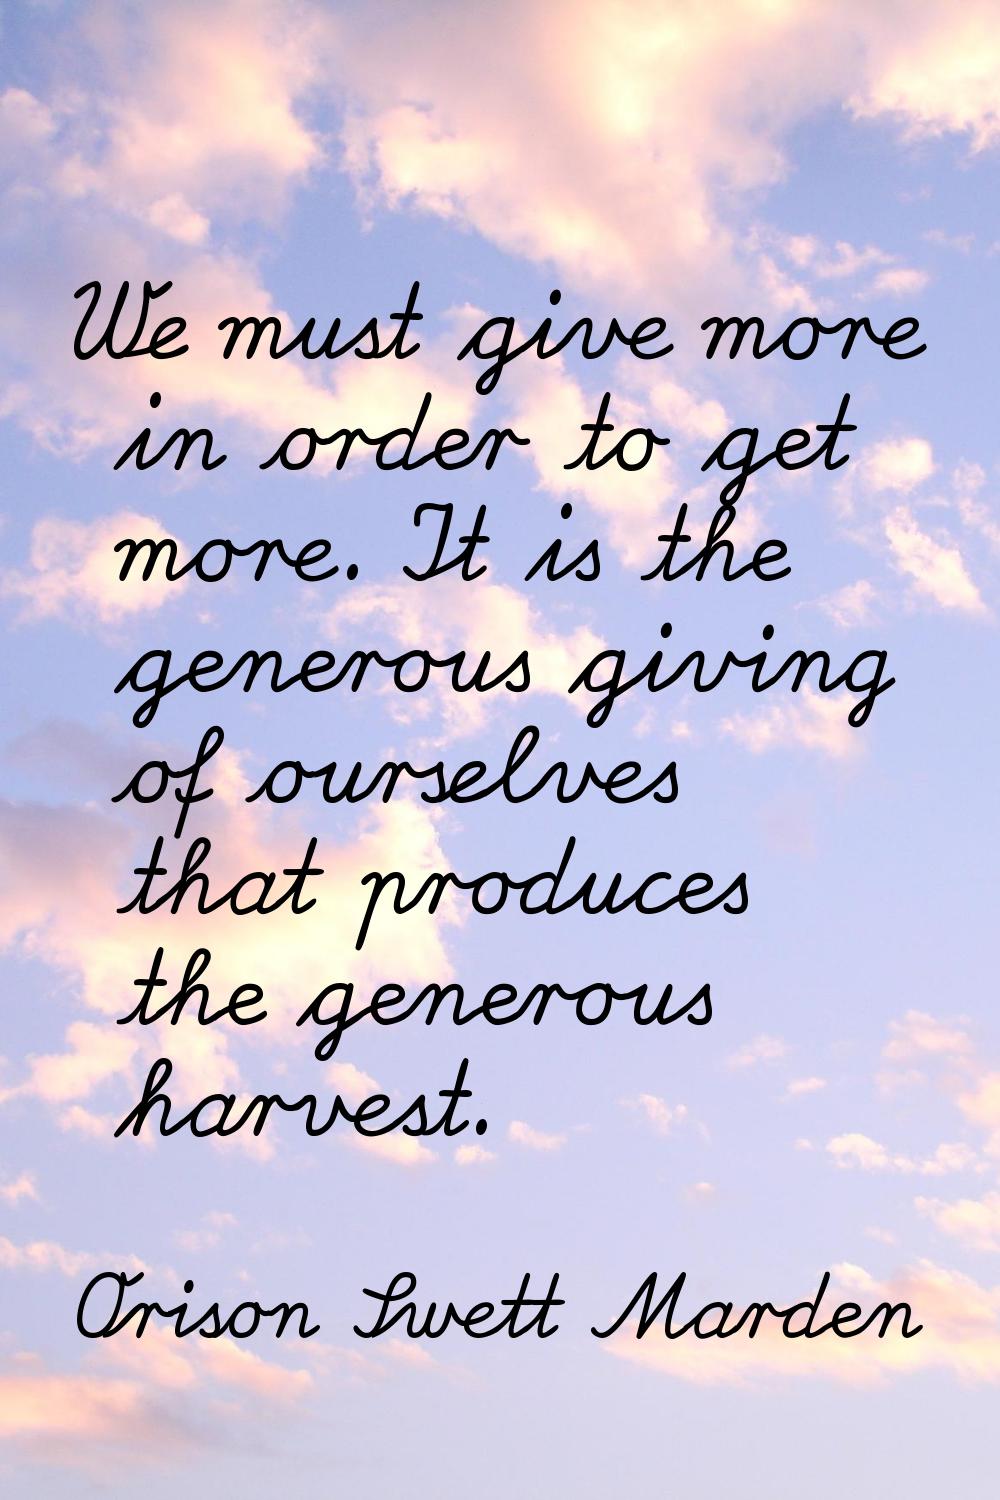 We must give more in order to get more. It is the generous giving of ourselves that produces the ge